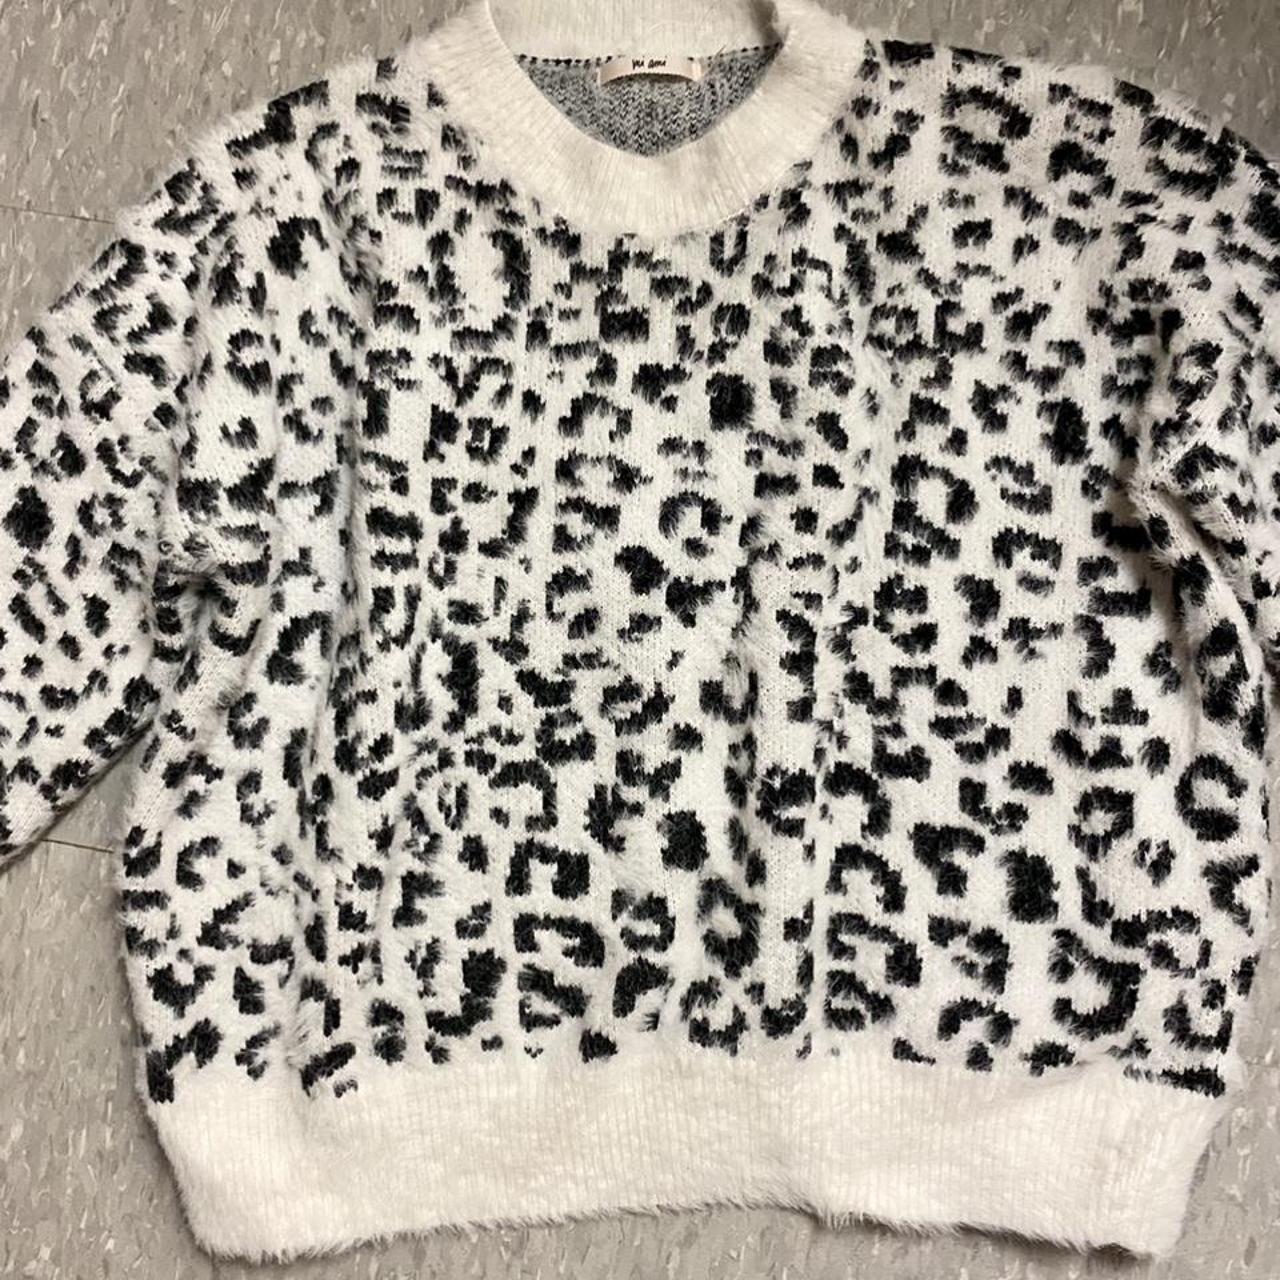 Product Image 1 - Fuzzy Leopard Sweater, XL but